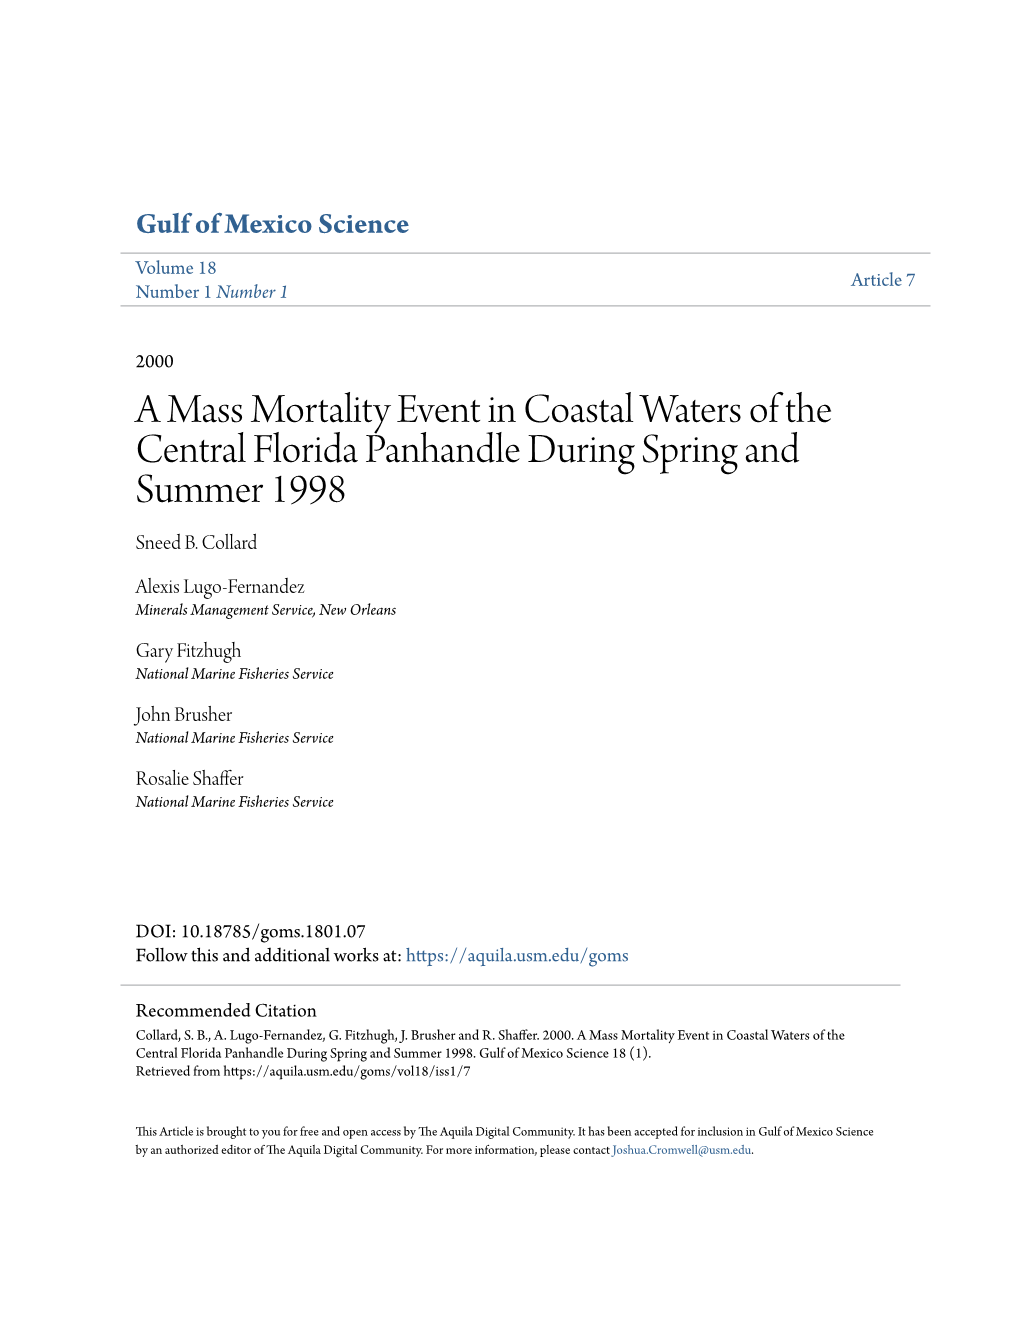 A Mass Mortality Event in Coastal Waters of the Central Florida Panhandle During Spring and Summer 1998 Sneed B